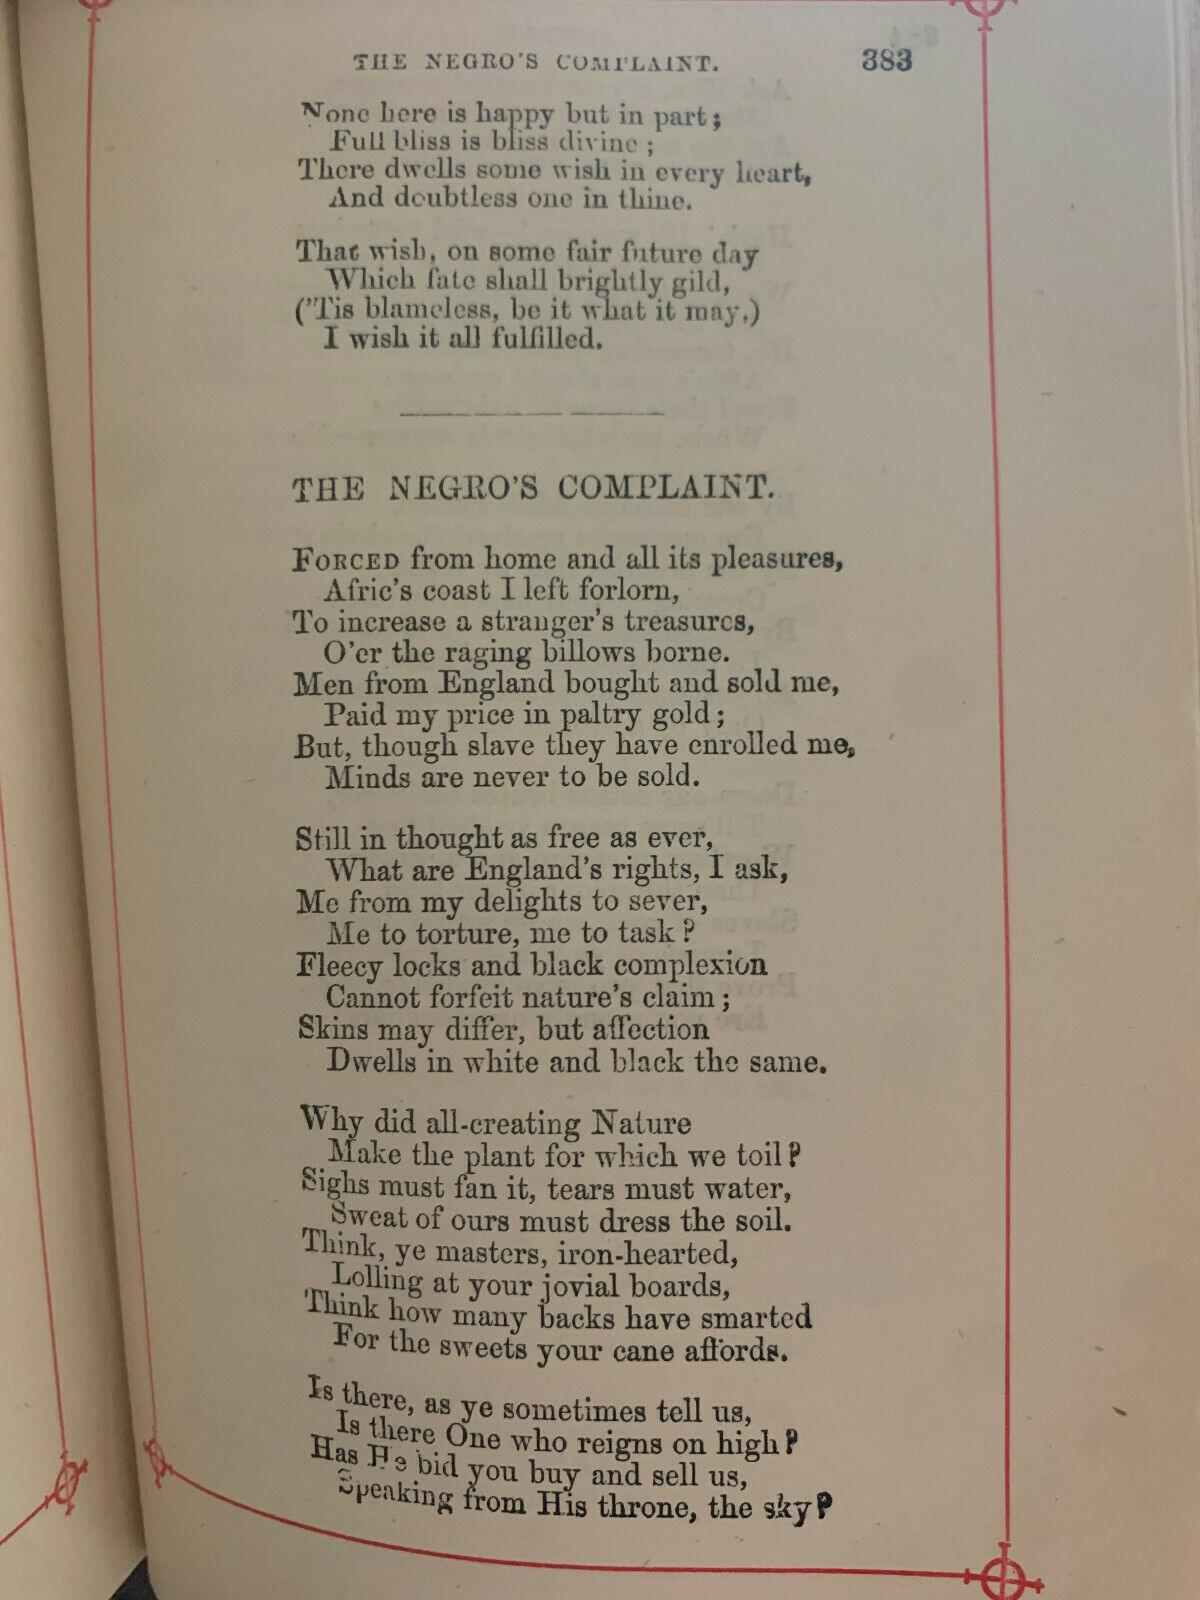 Poetical Works of William Cowper Late 1800s  Anti Slavery Poem, Victorian HS9)